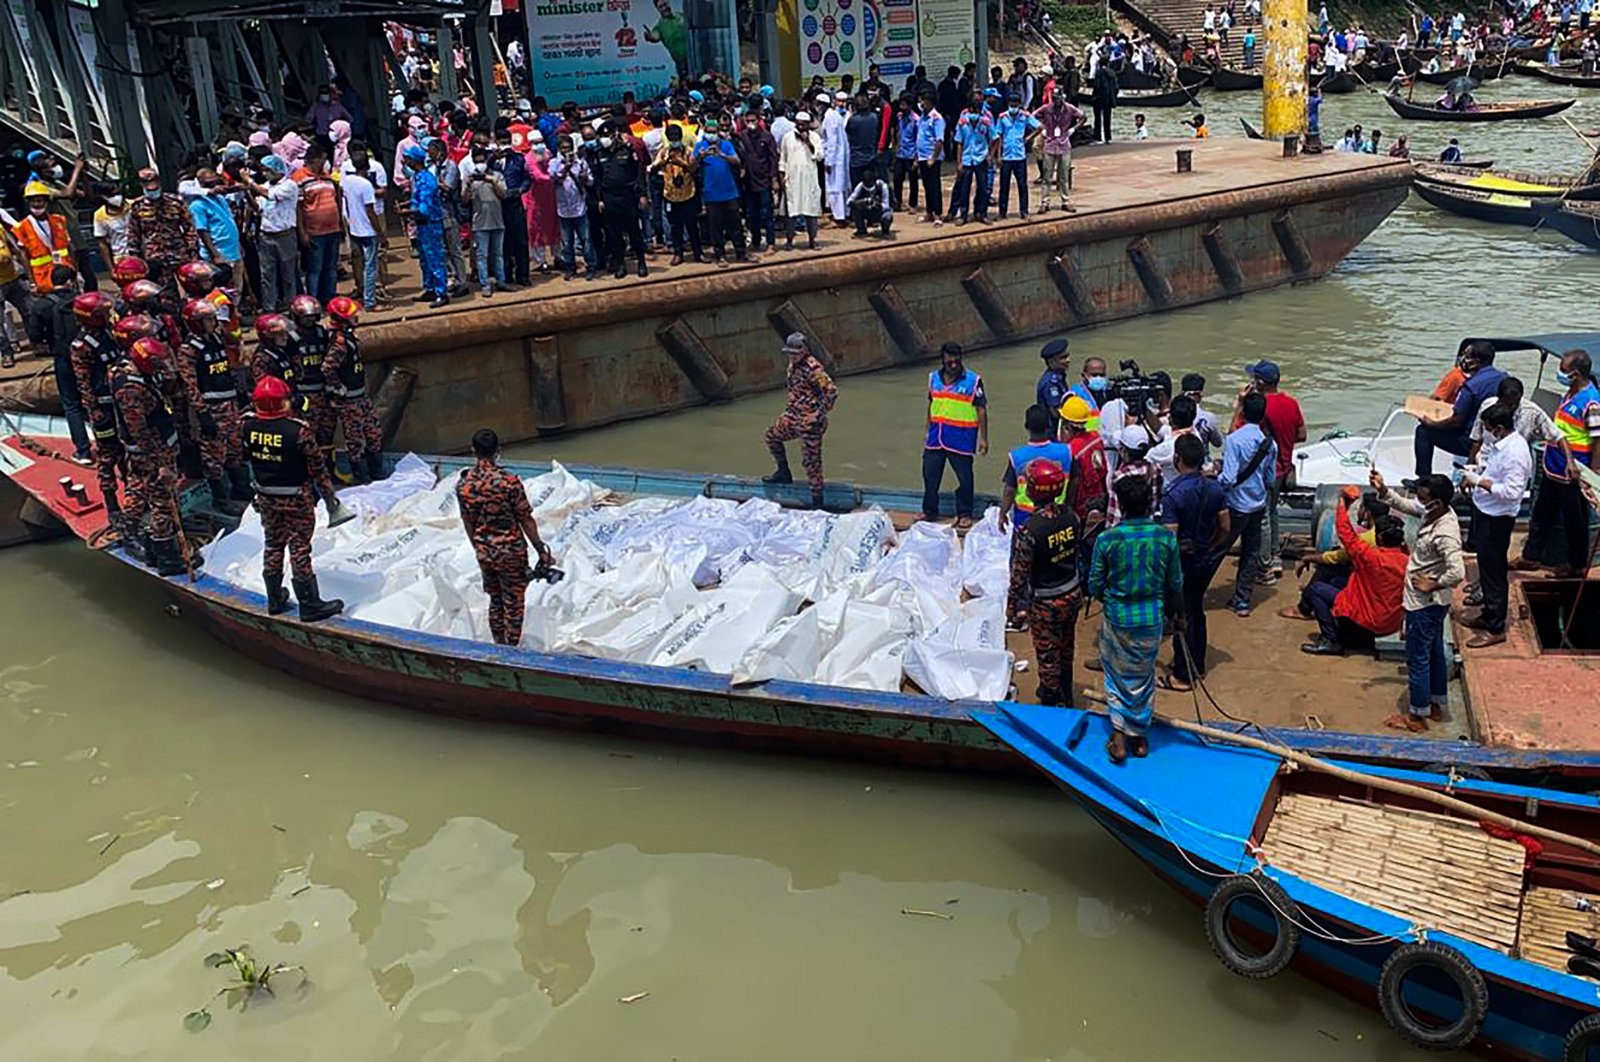 Rescue workers bring the bodies of victims after a ferry capsized at the Sadarghat ferry terminal in Dhaka, June 29, 2020. (AFP Photo)